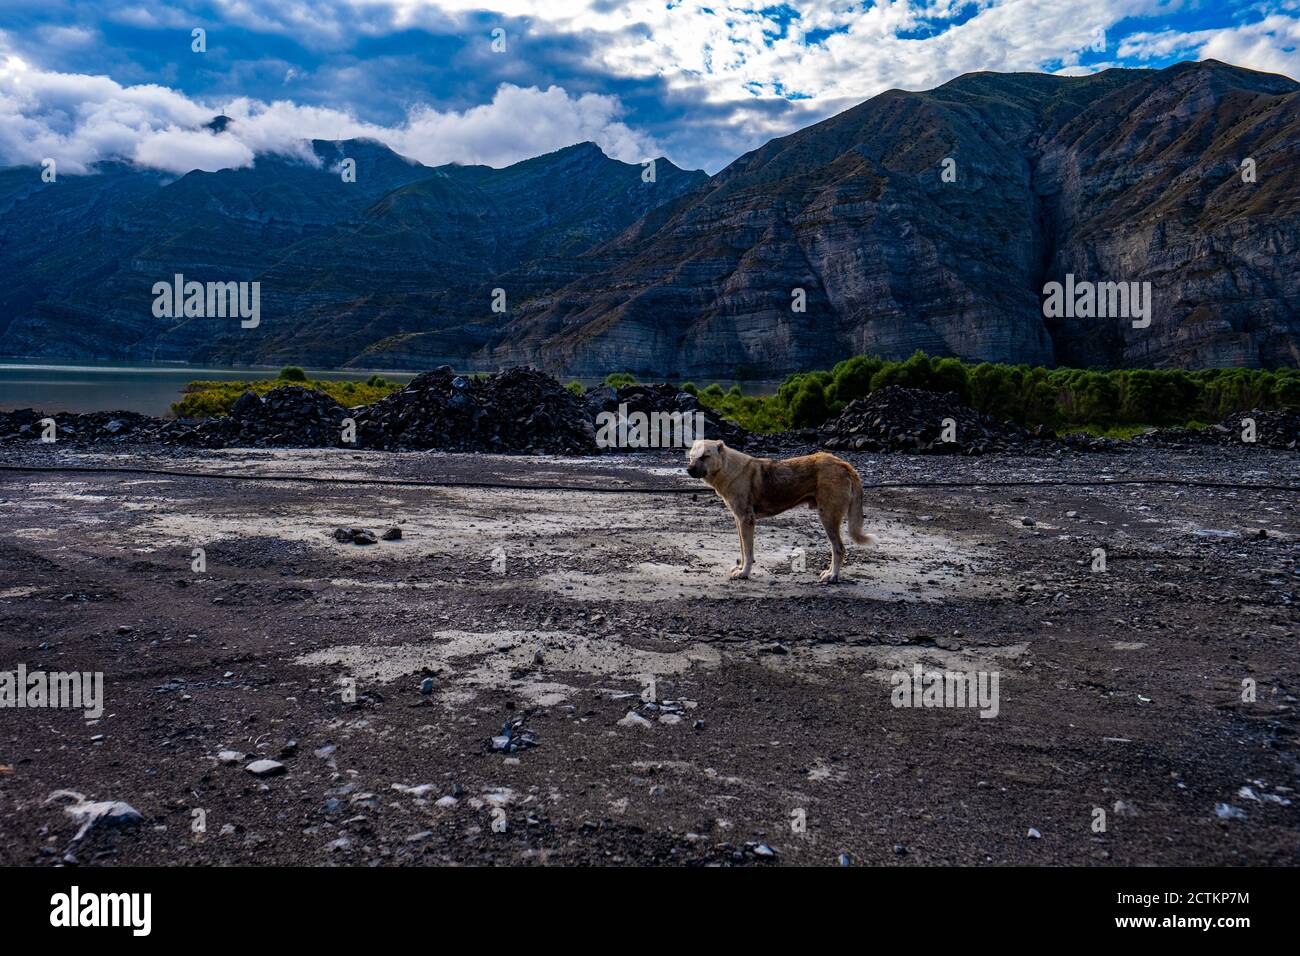 View of standing Anatolian shepherd with the background of a rocky mountain Stock Photo